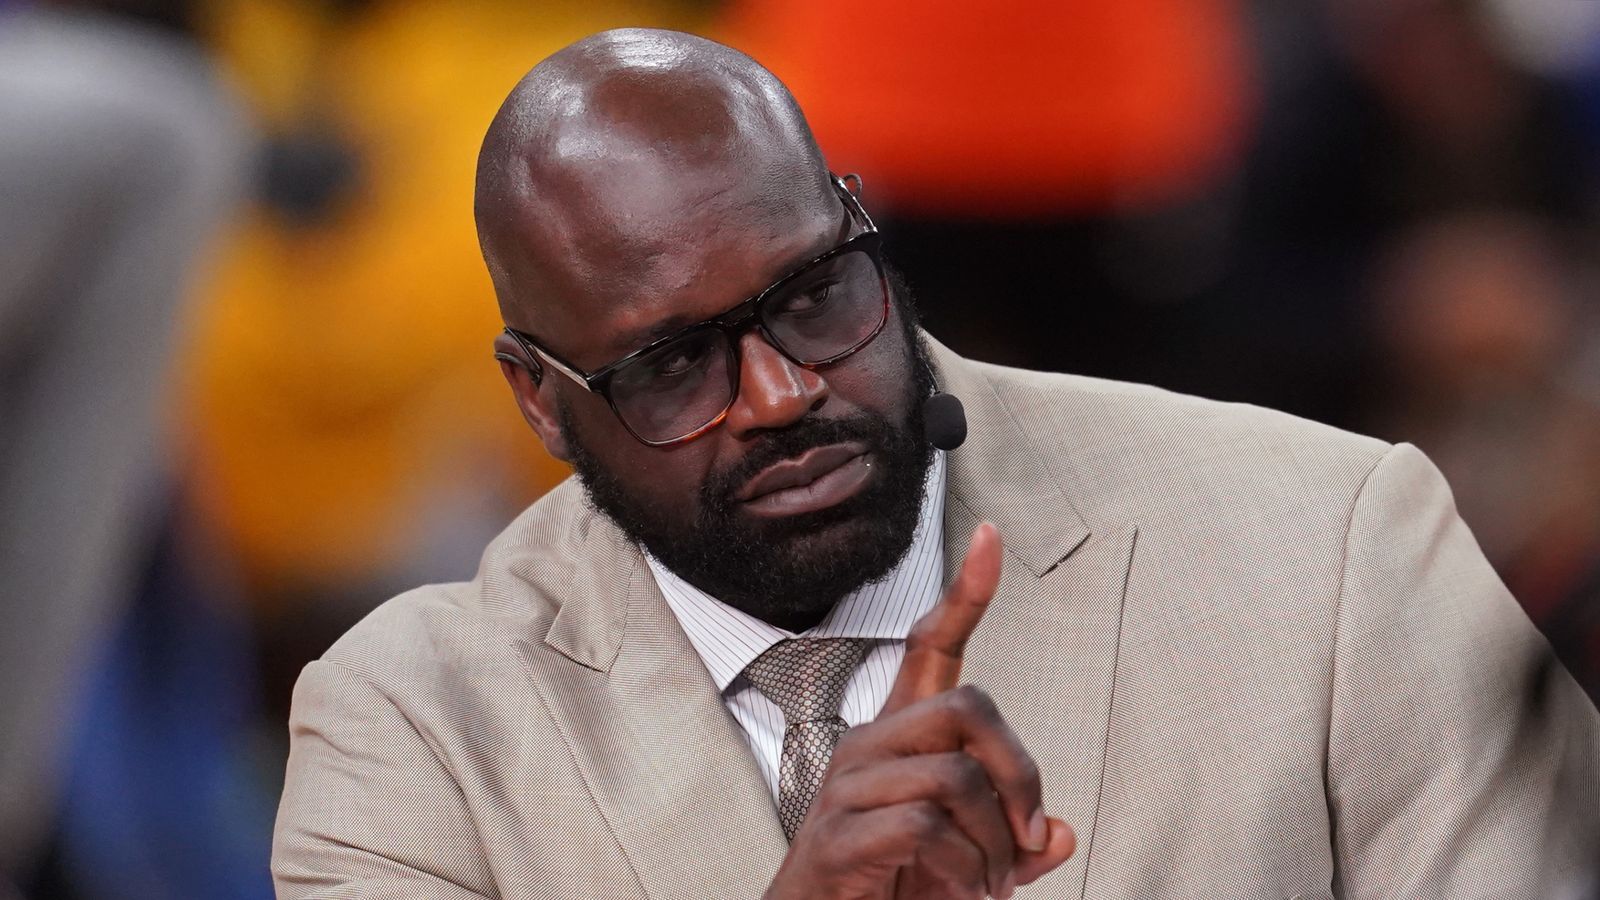 Shaquille O'Neal says 'I don't understand crypto' after being named in lawsuit over FTX collapse